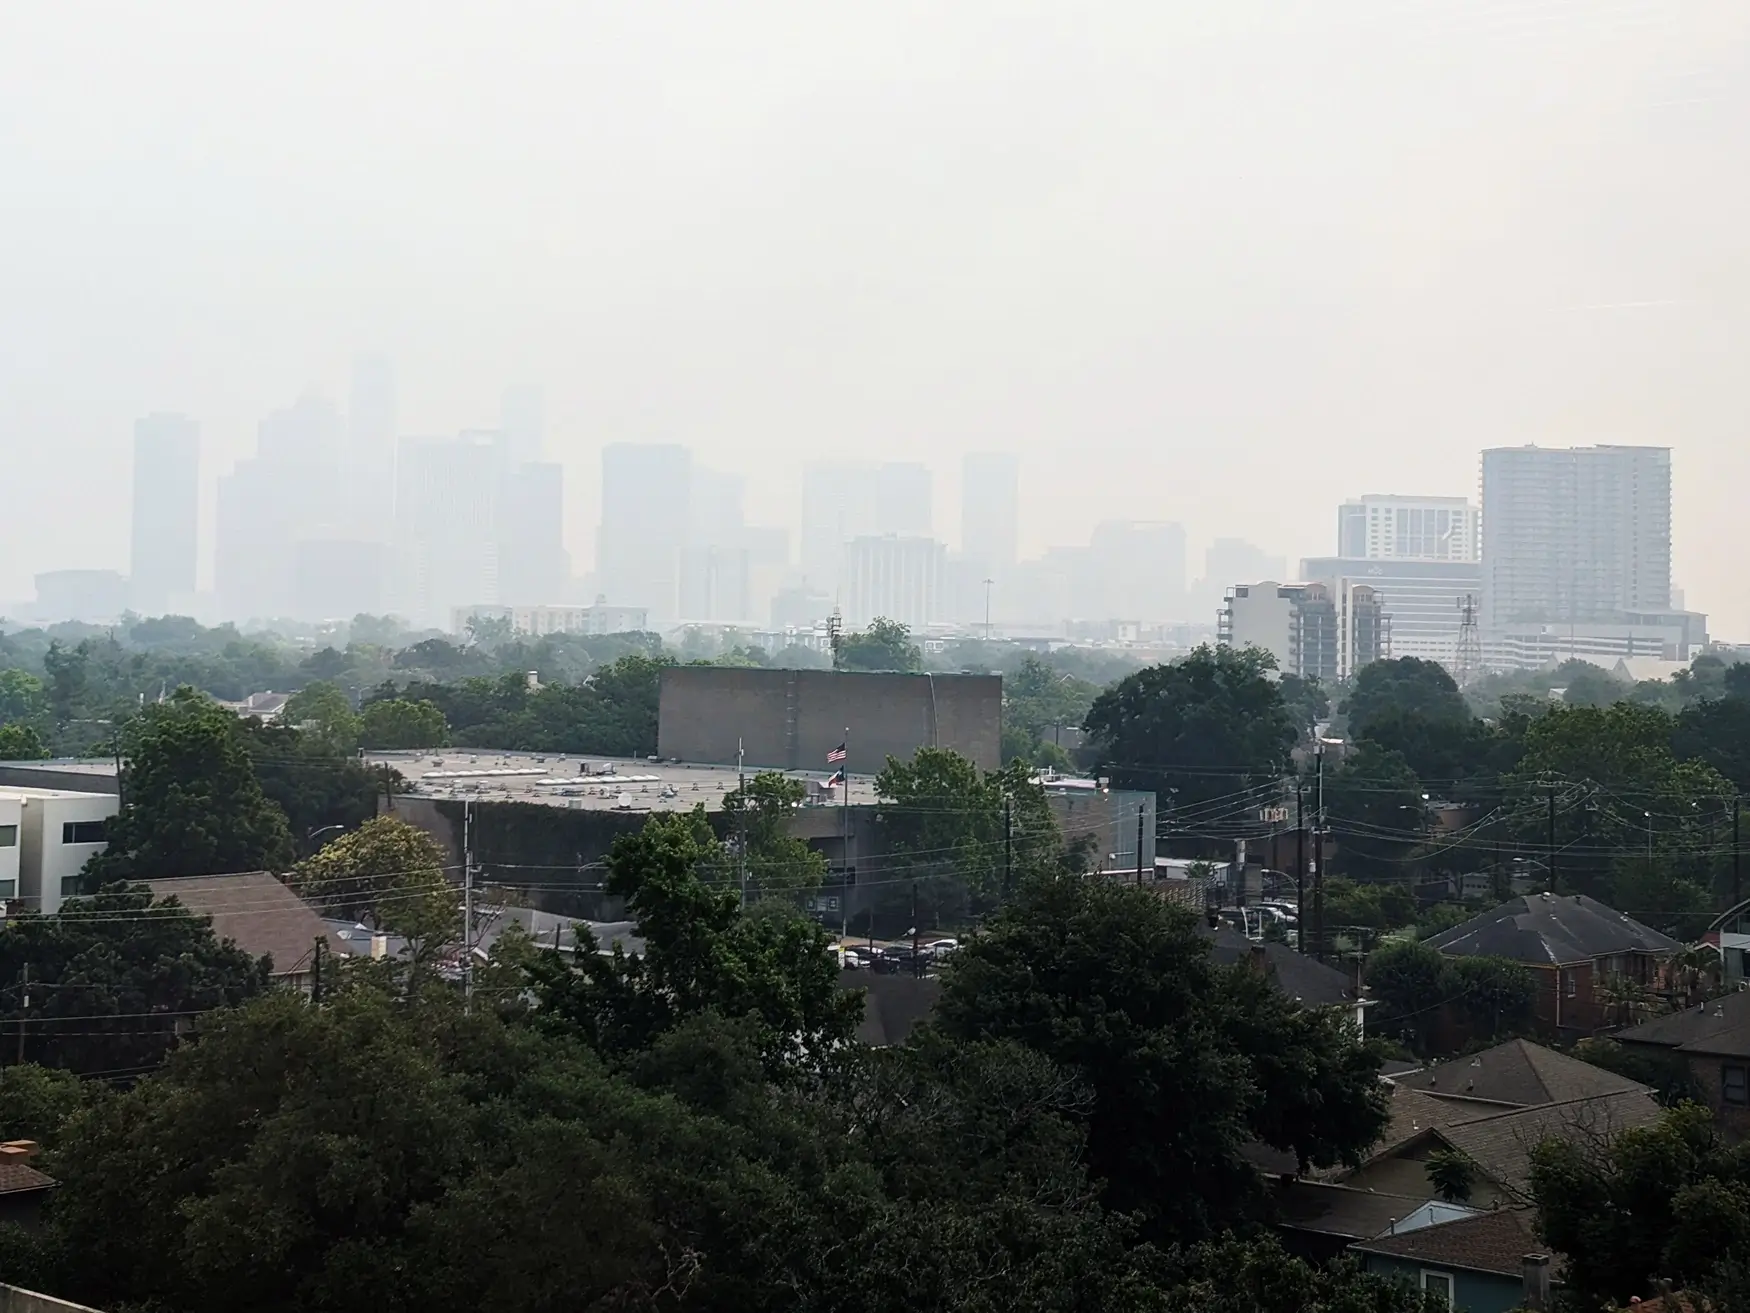 Wondering why it's been so hazy in the Houston area this week? Here's what to know.